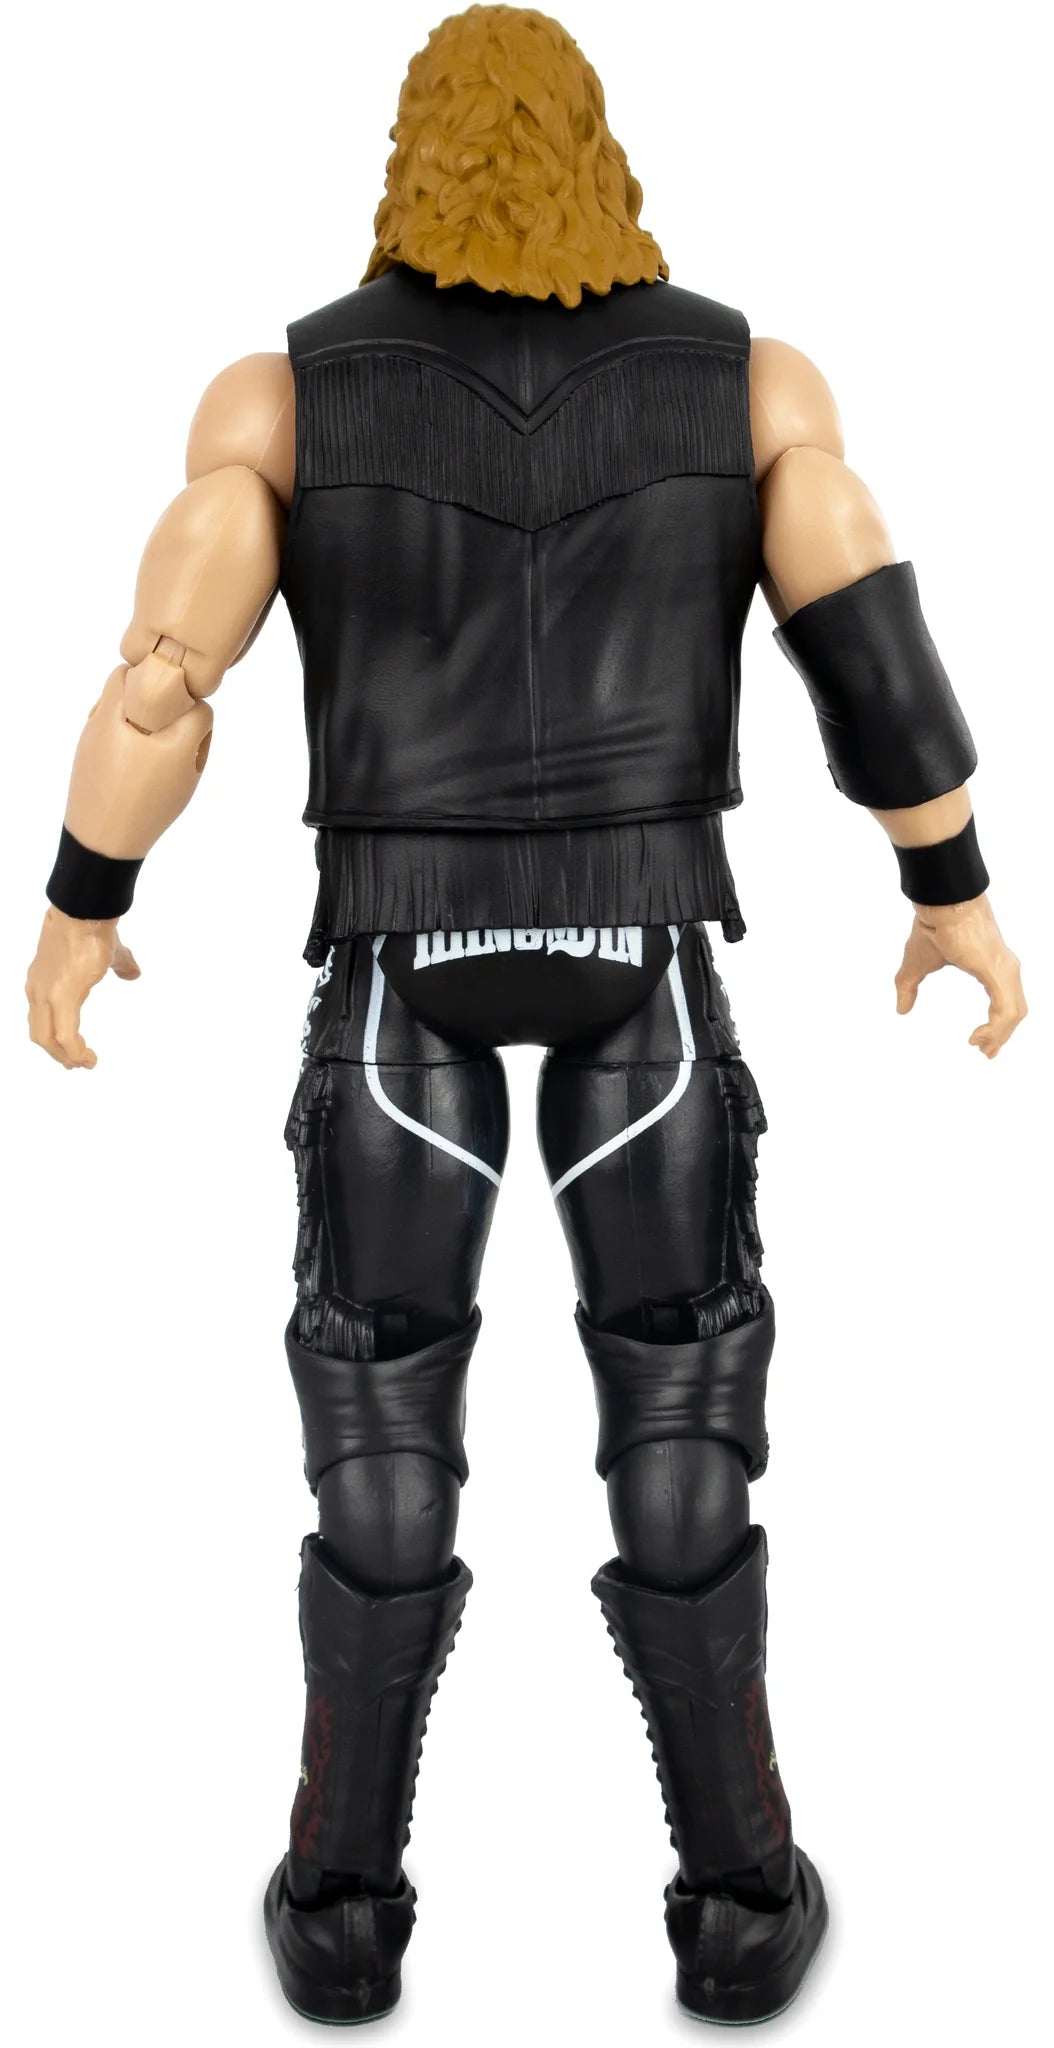 AEW UNRIVALED FIGURE PACK - ADAM PAGE